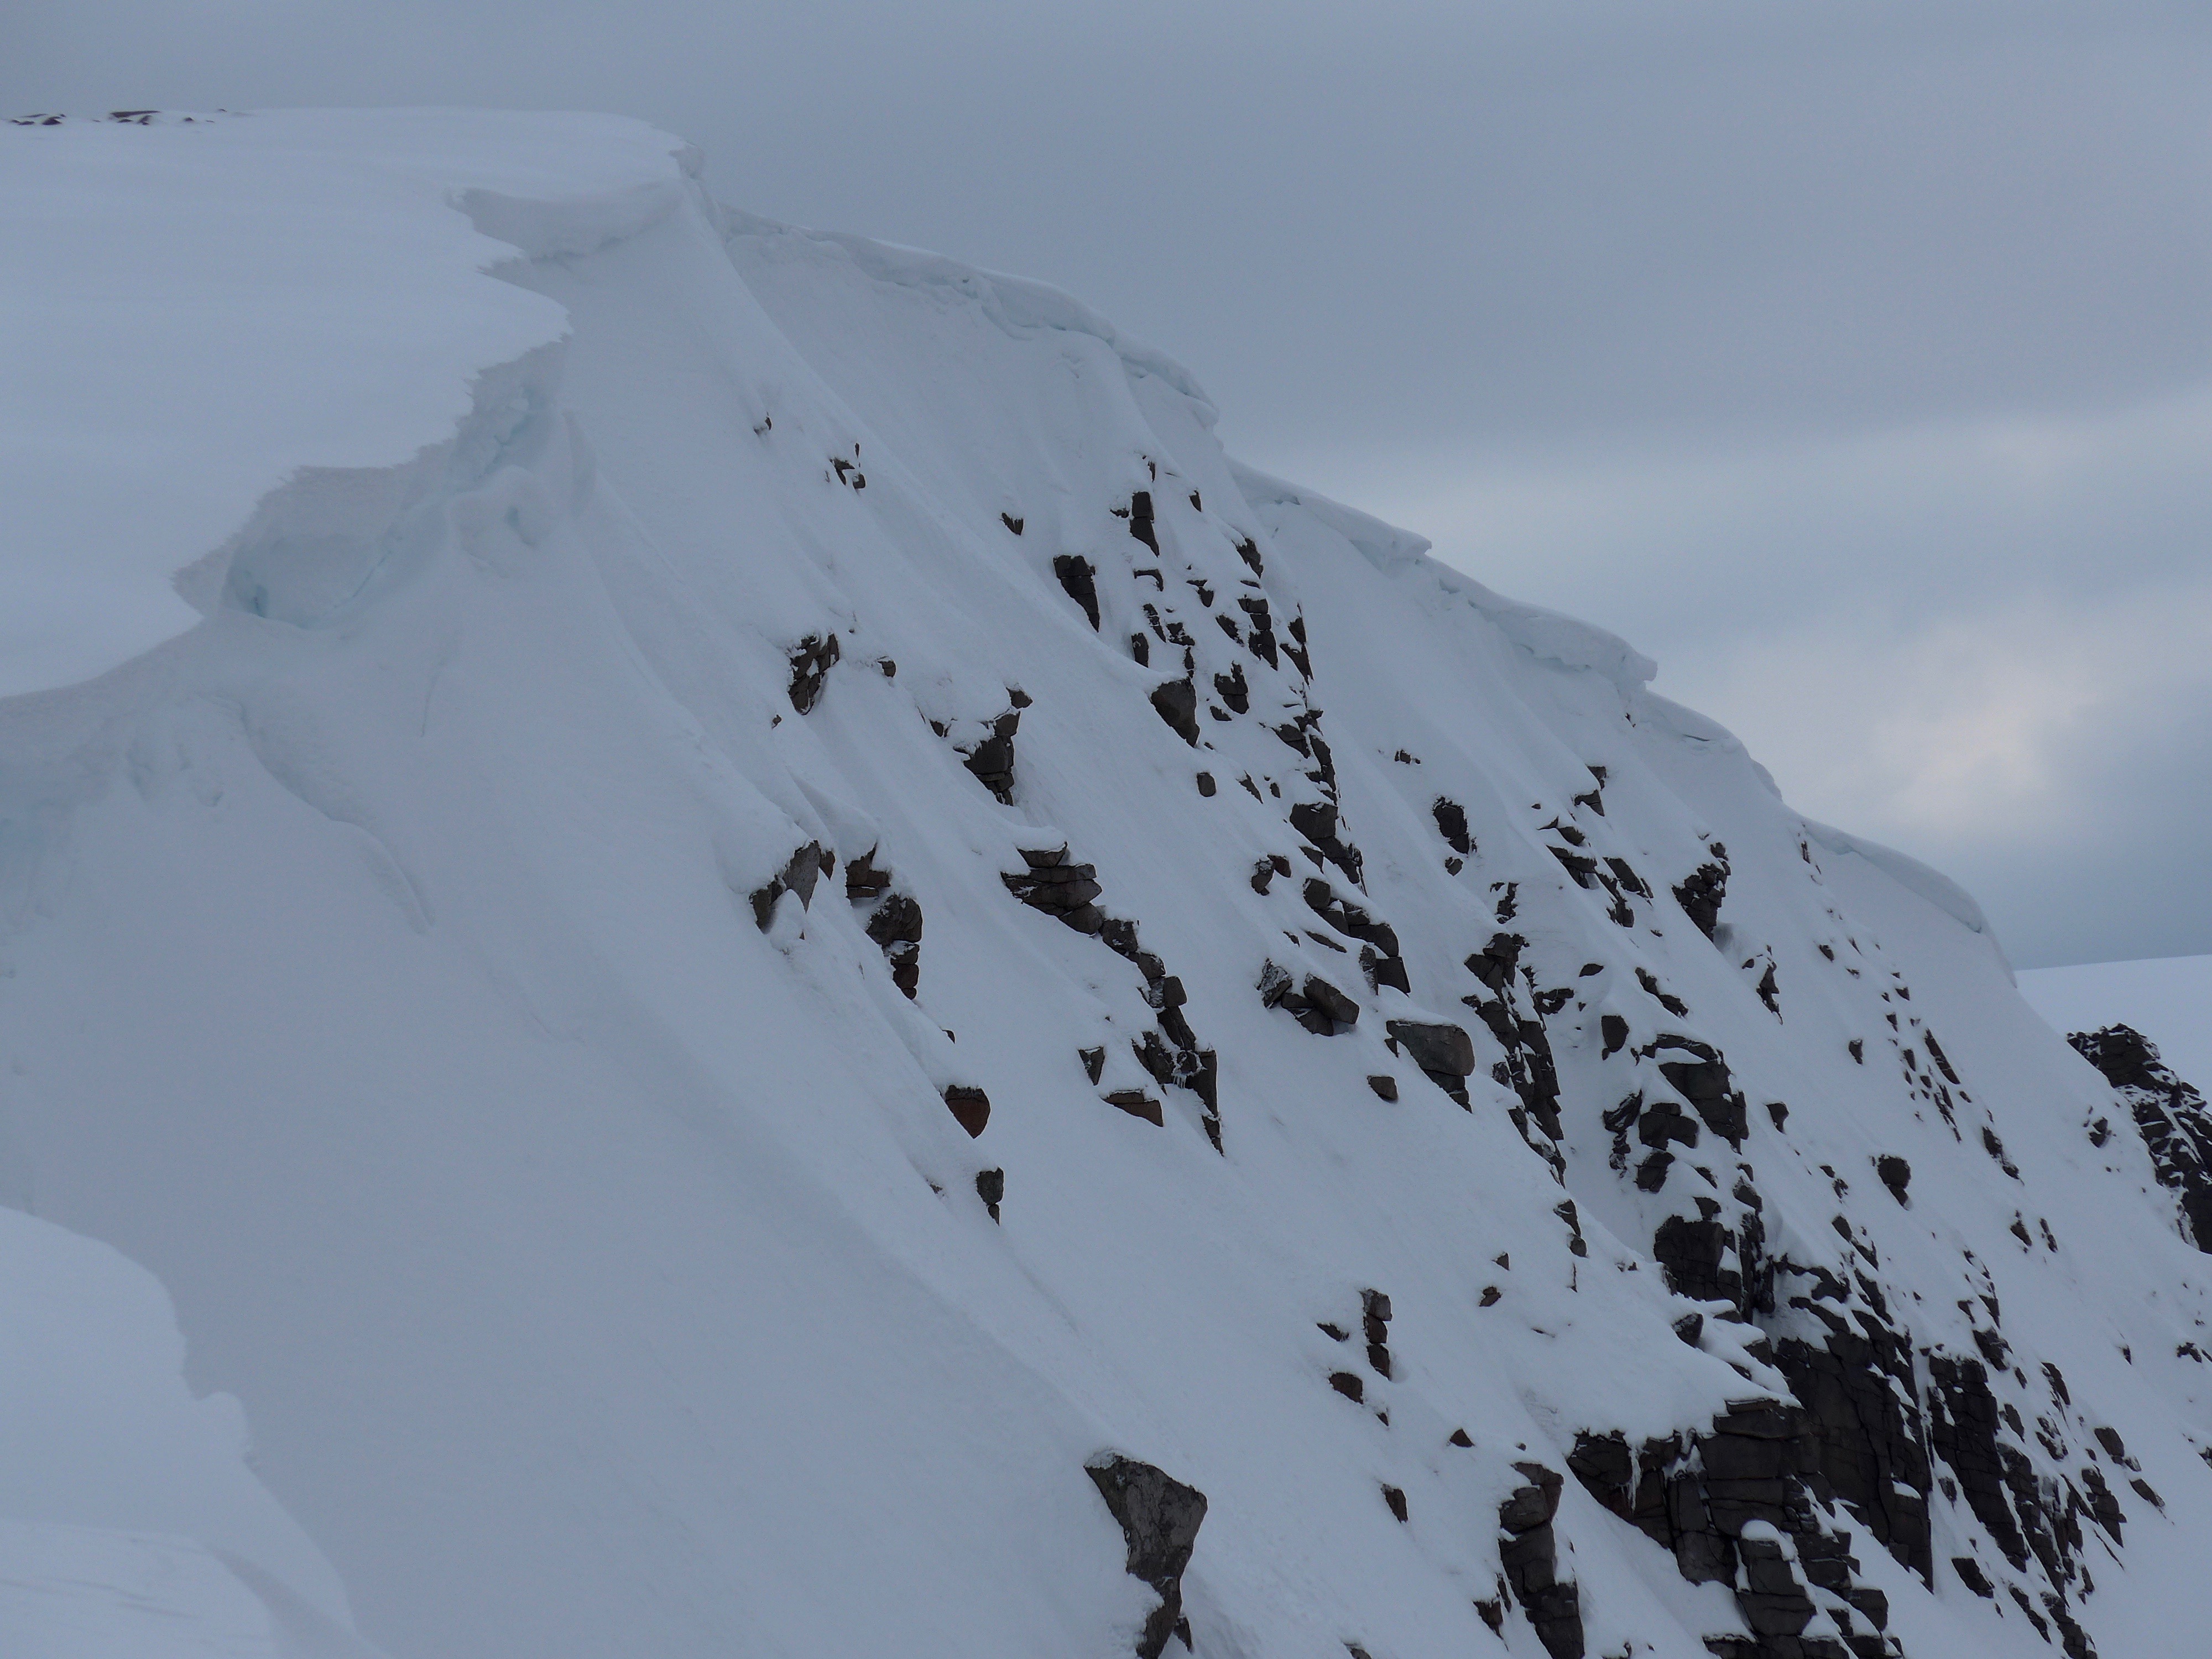 Cornices overhang many Northerly slopes